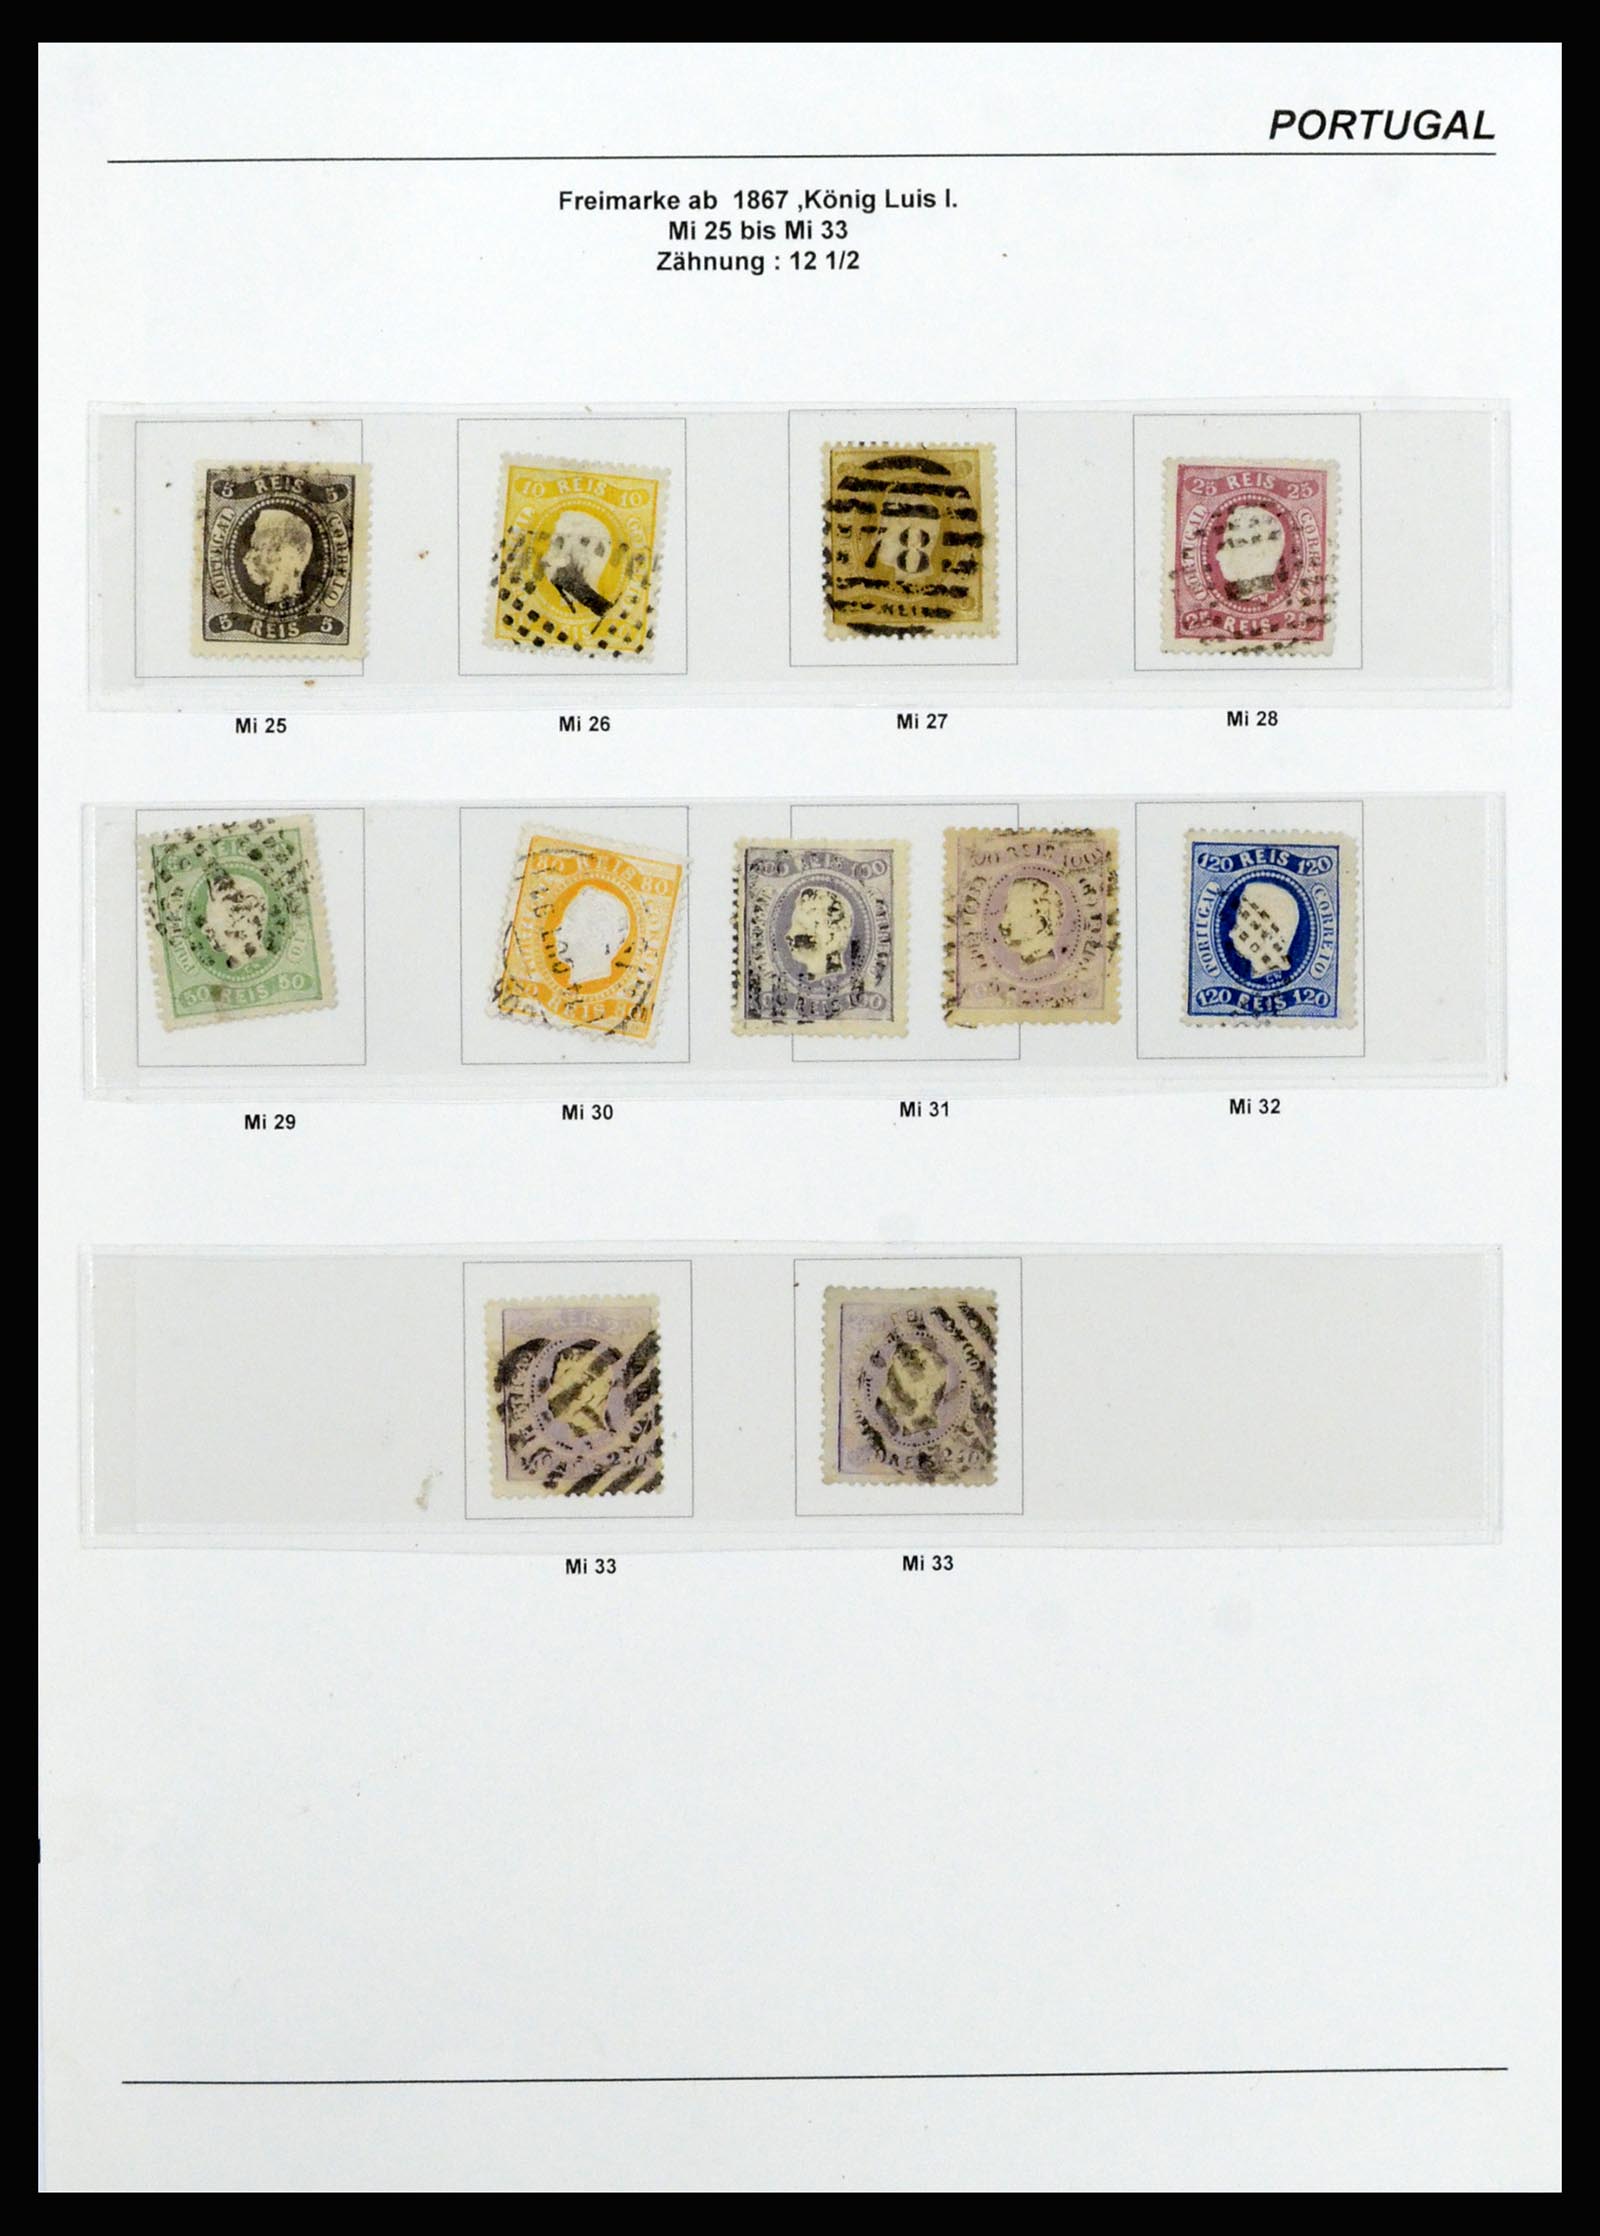 37133 024 - Stamp collection 37133 Portugal 1853-1893.